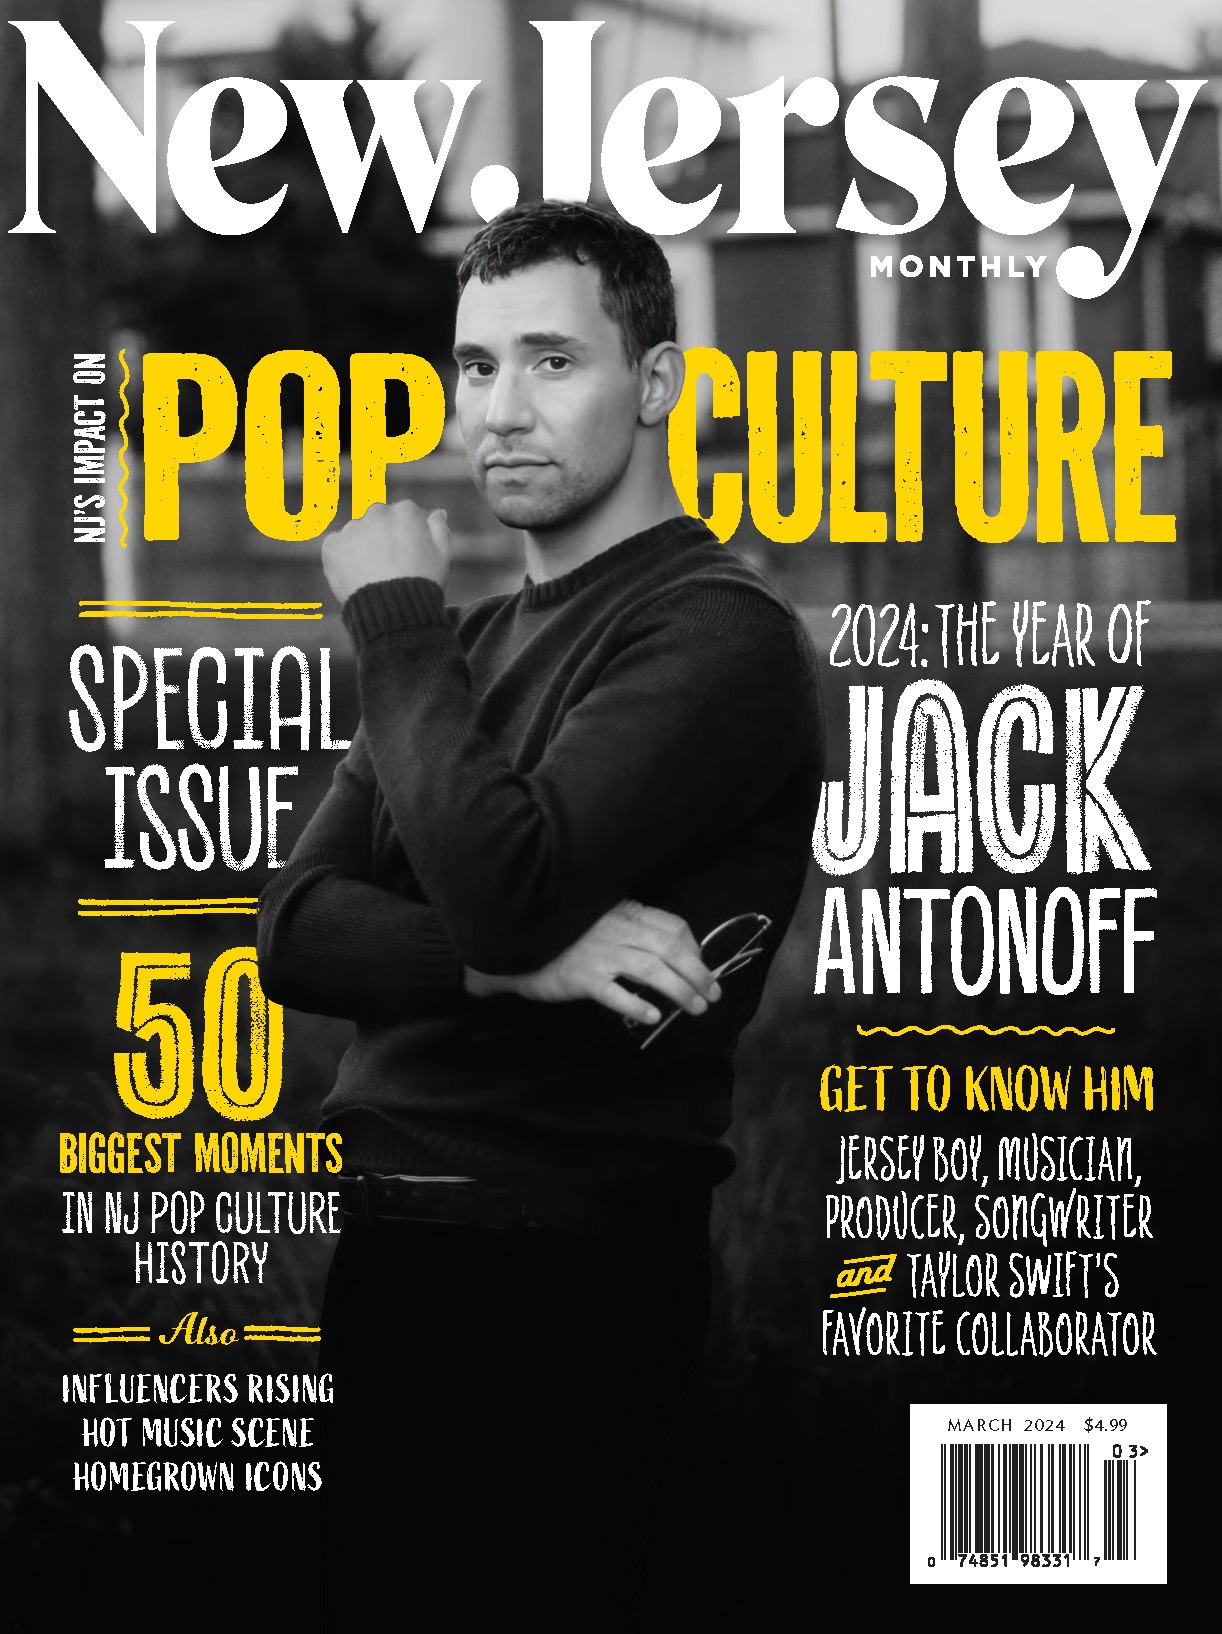 March 2024 cover of New Jersey Monthly featuring Jack Antonoff